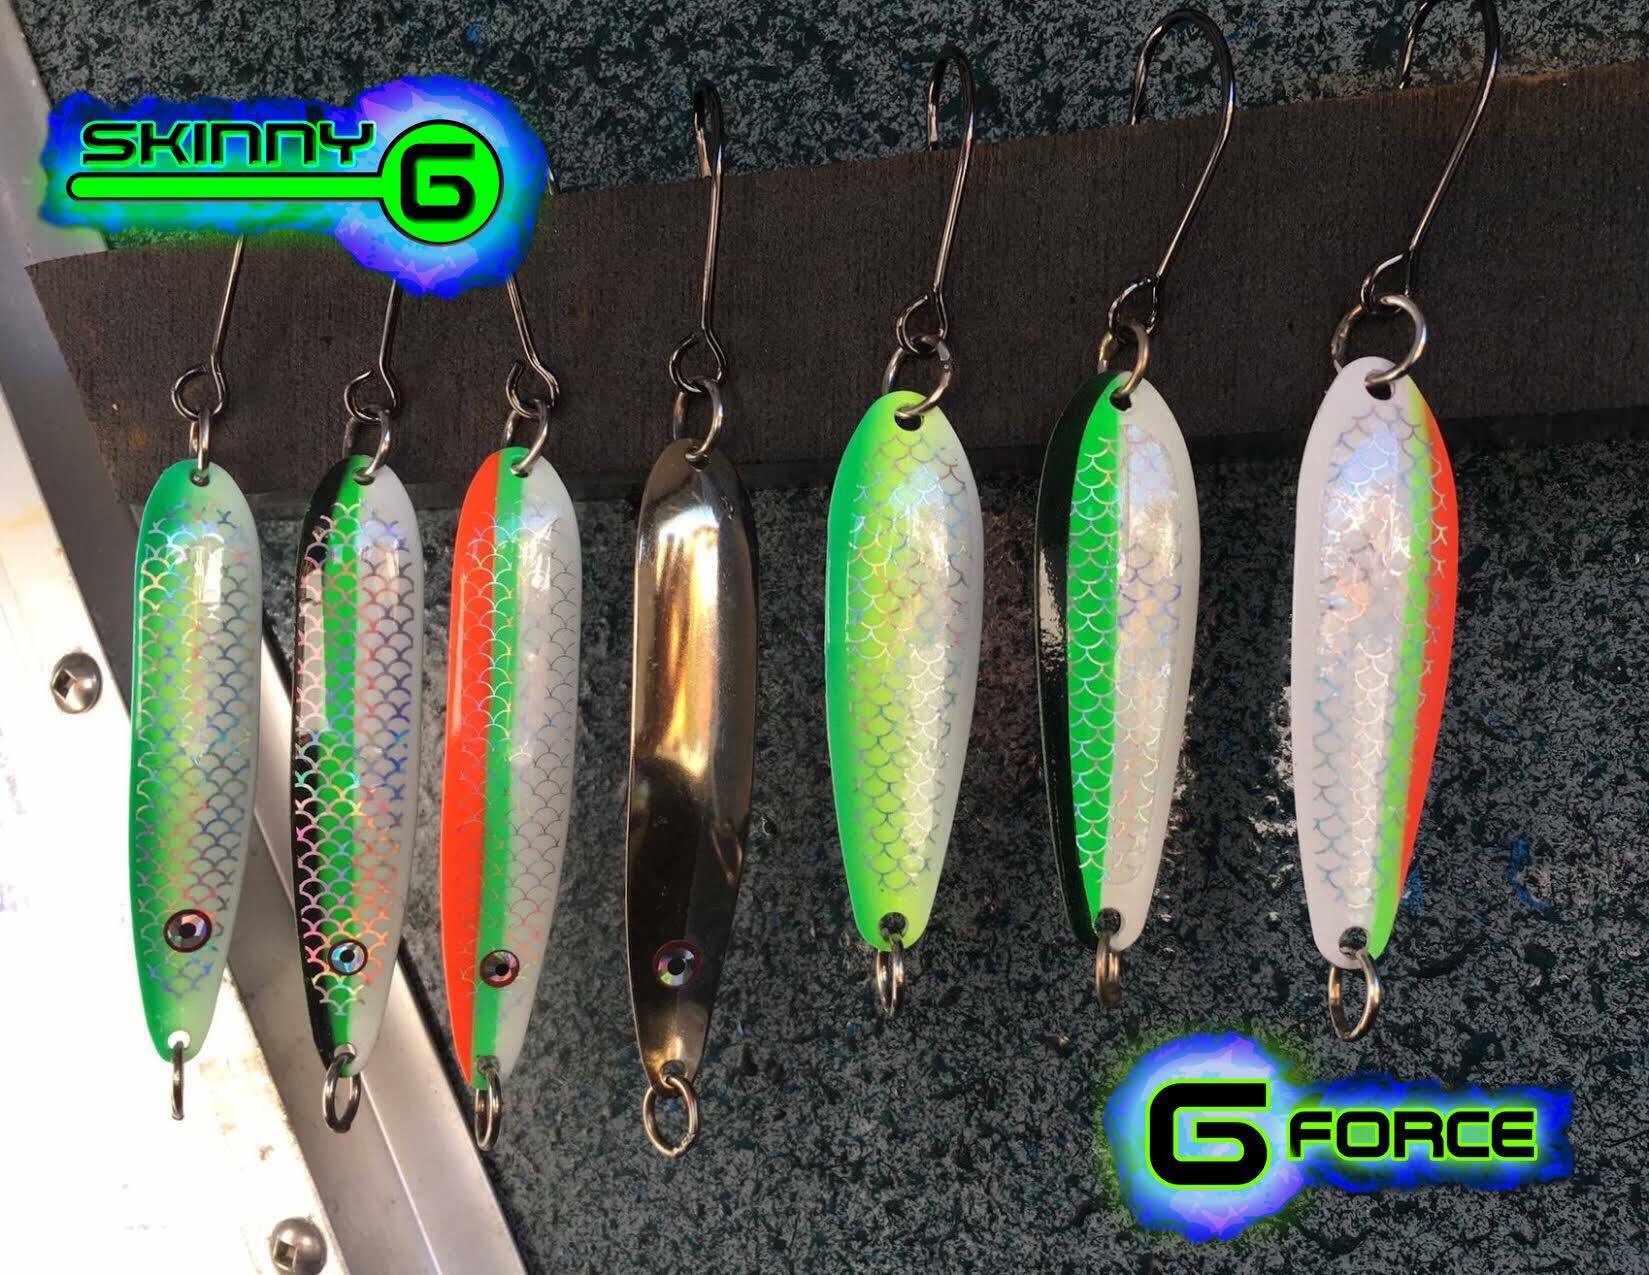 Gibbs-Delta Tackle on X: Our Skinny G and G-force spoons continue